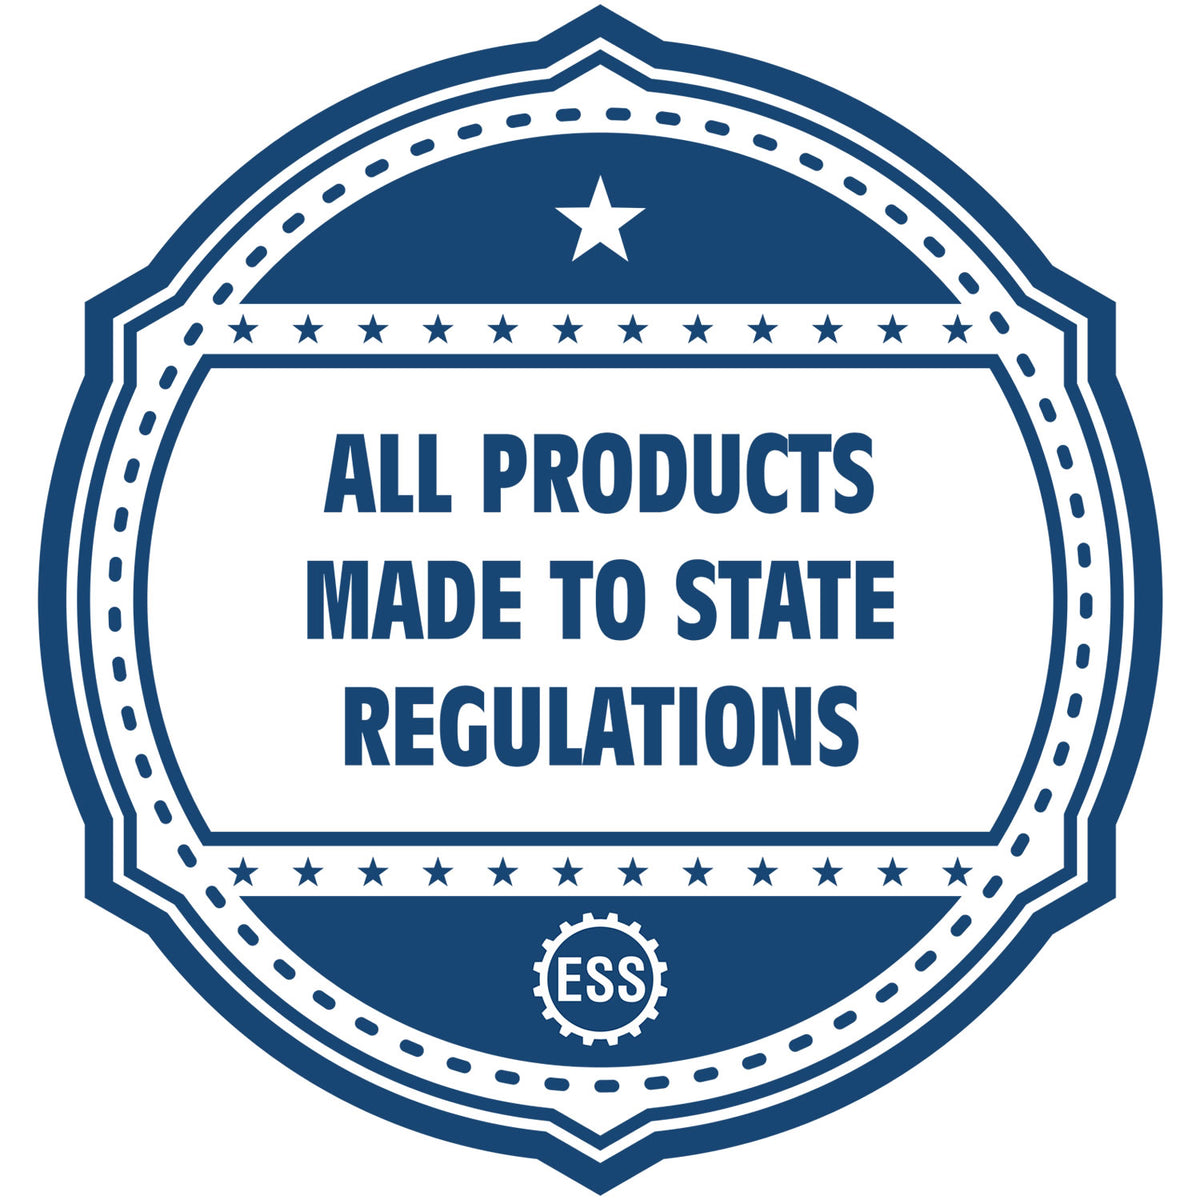 An icon or badge element for the State of Nevada Soft Land Surveyor Embossing Seal showing that this product is made in compliance with state regulations.